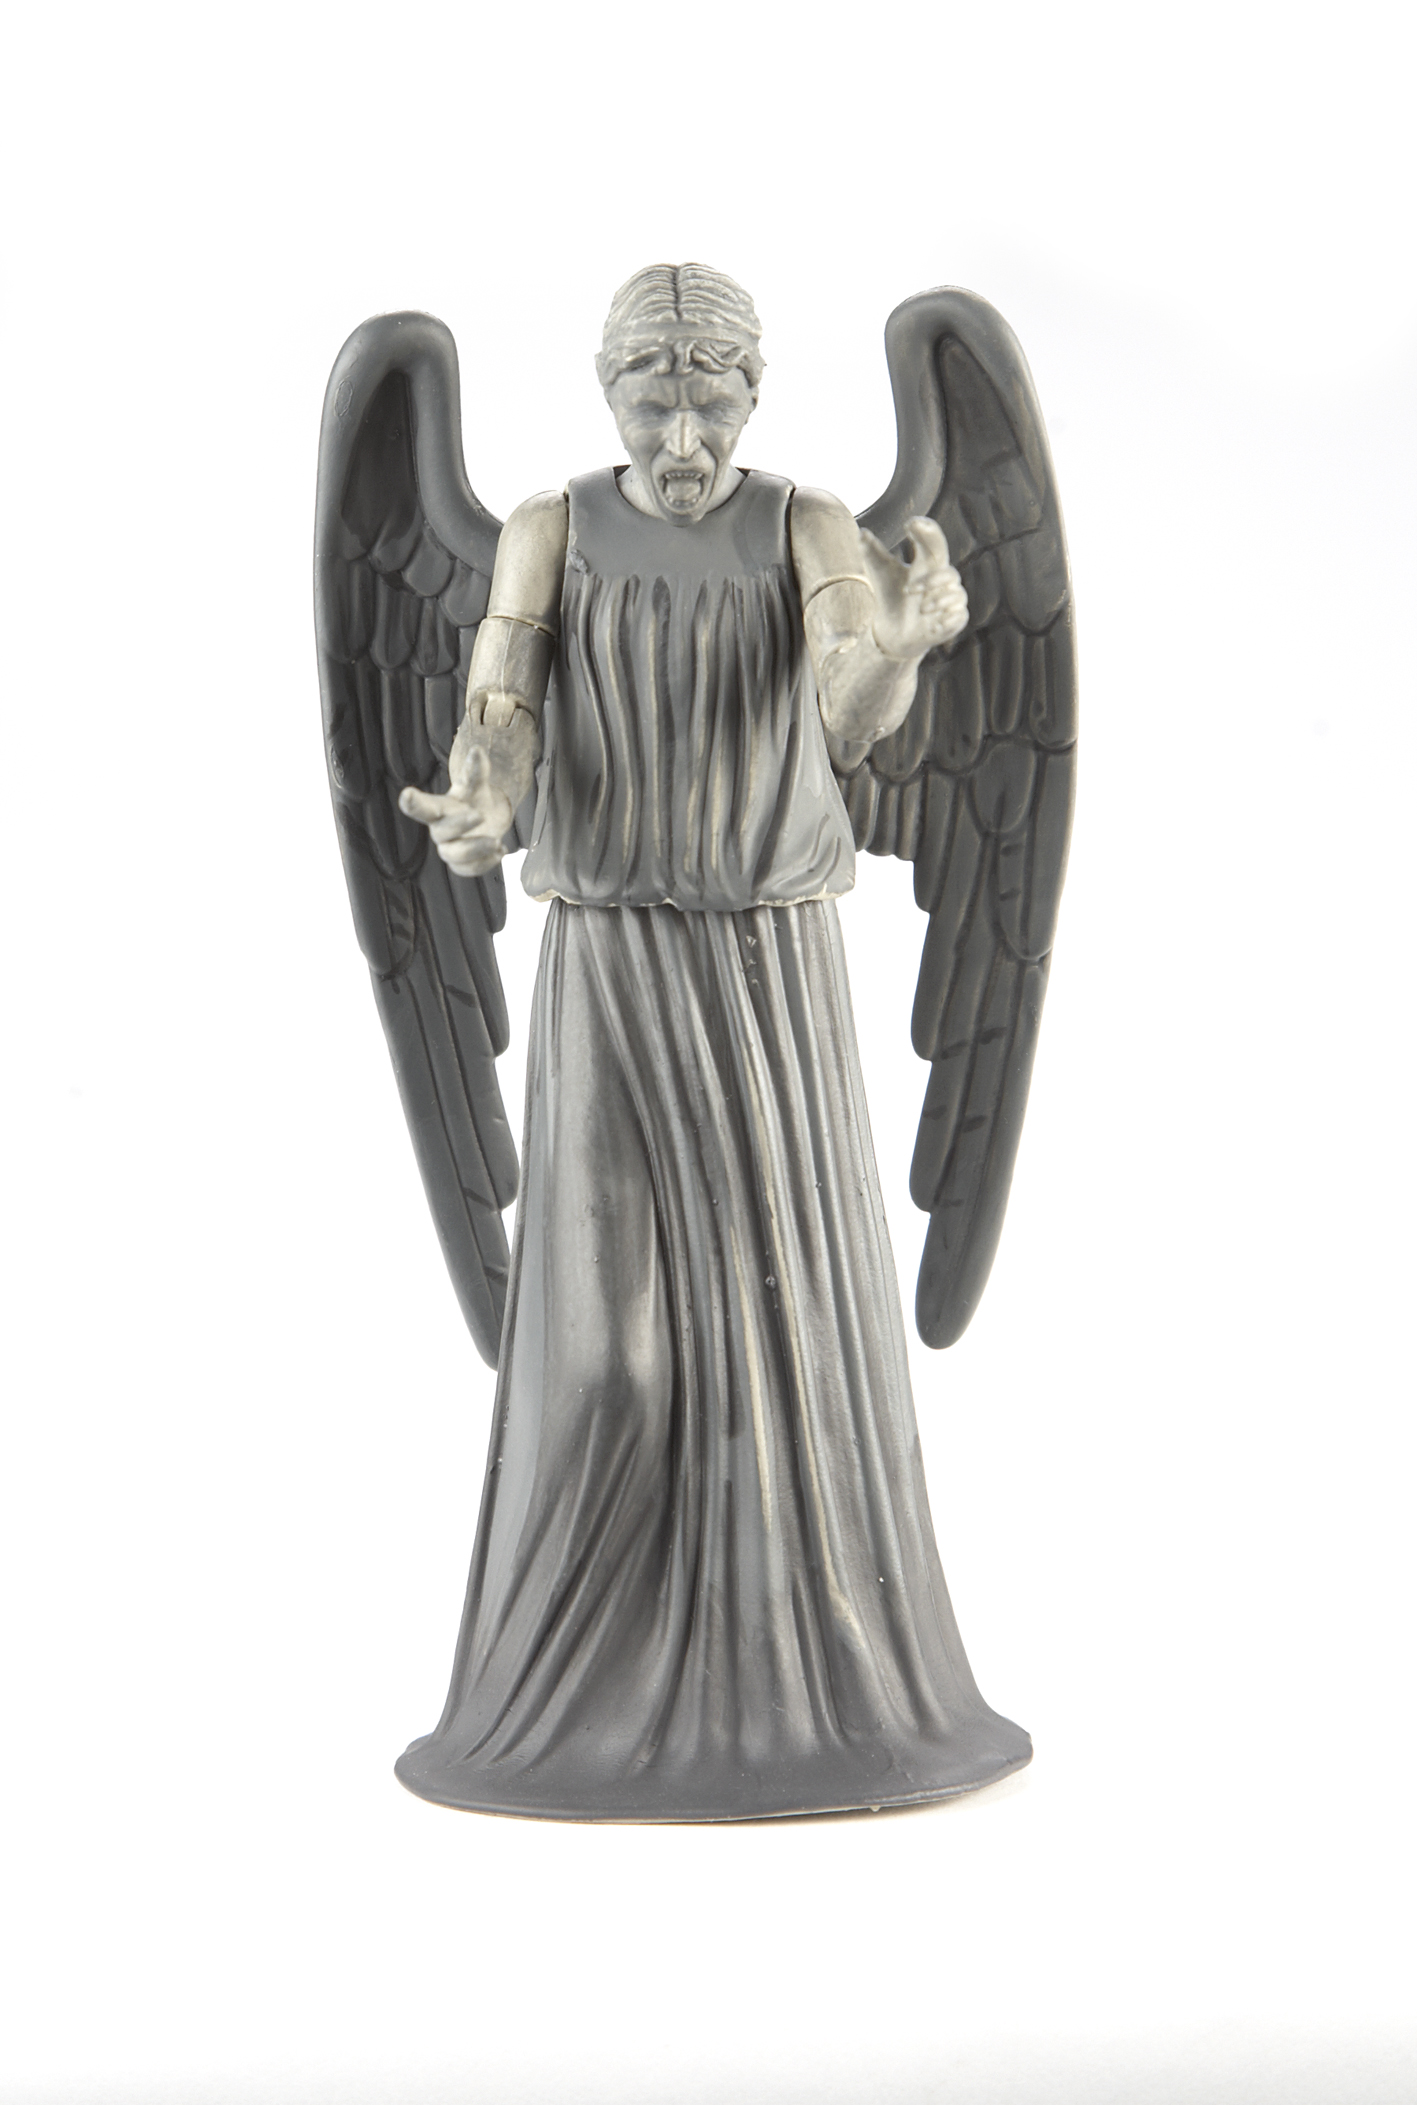 Doctor Who Dr Who Action Figs - Weeping Angel Regenerated